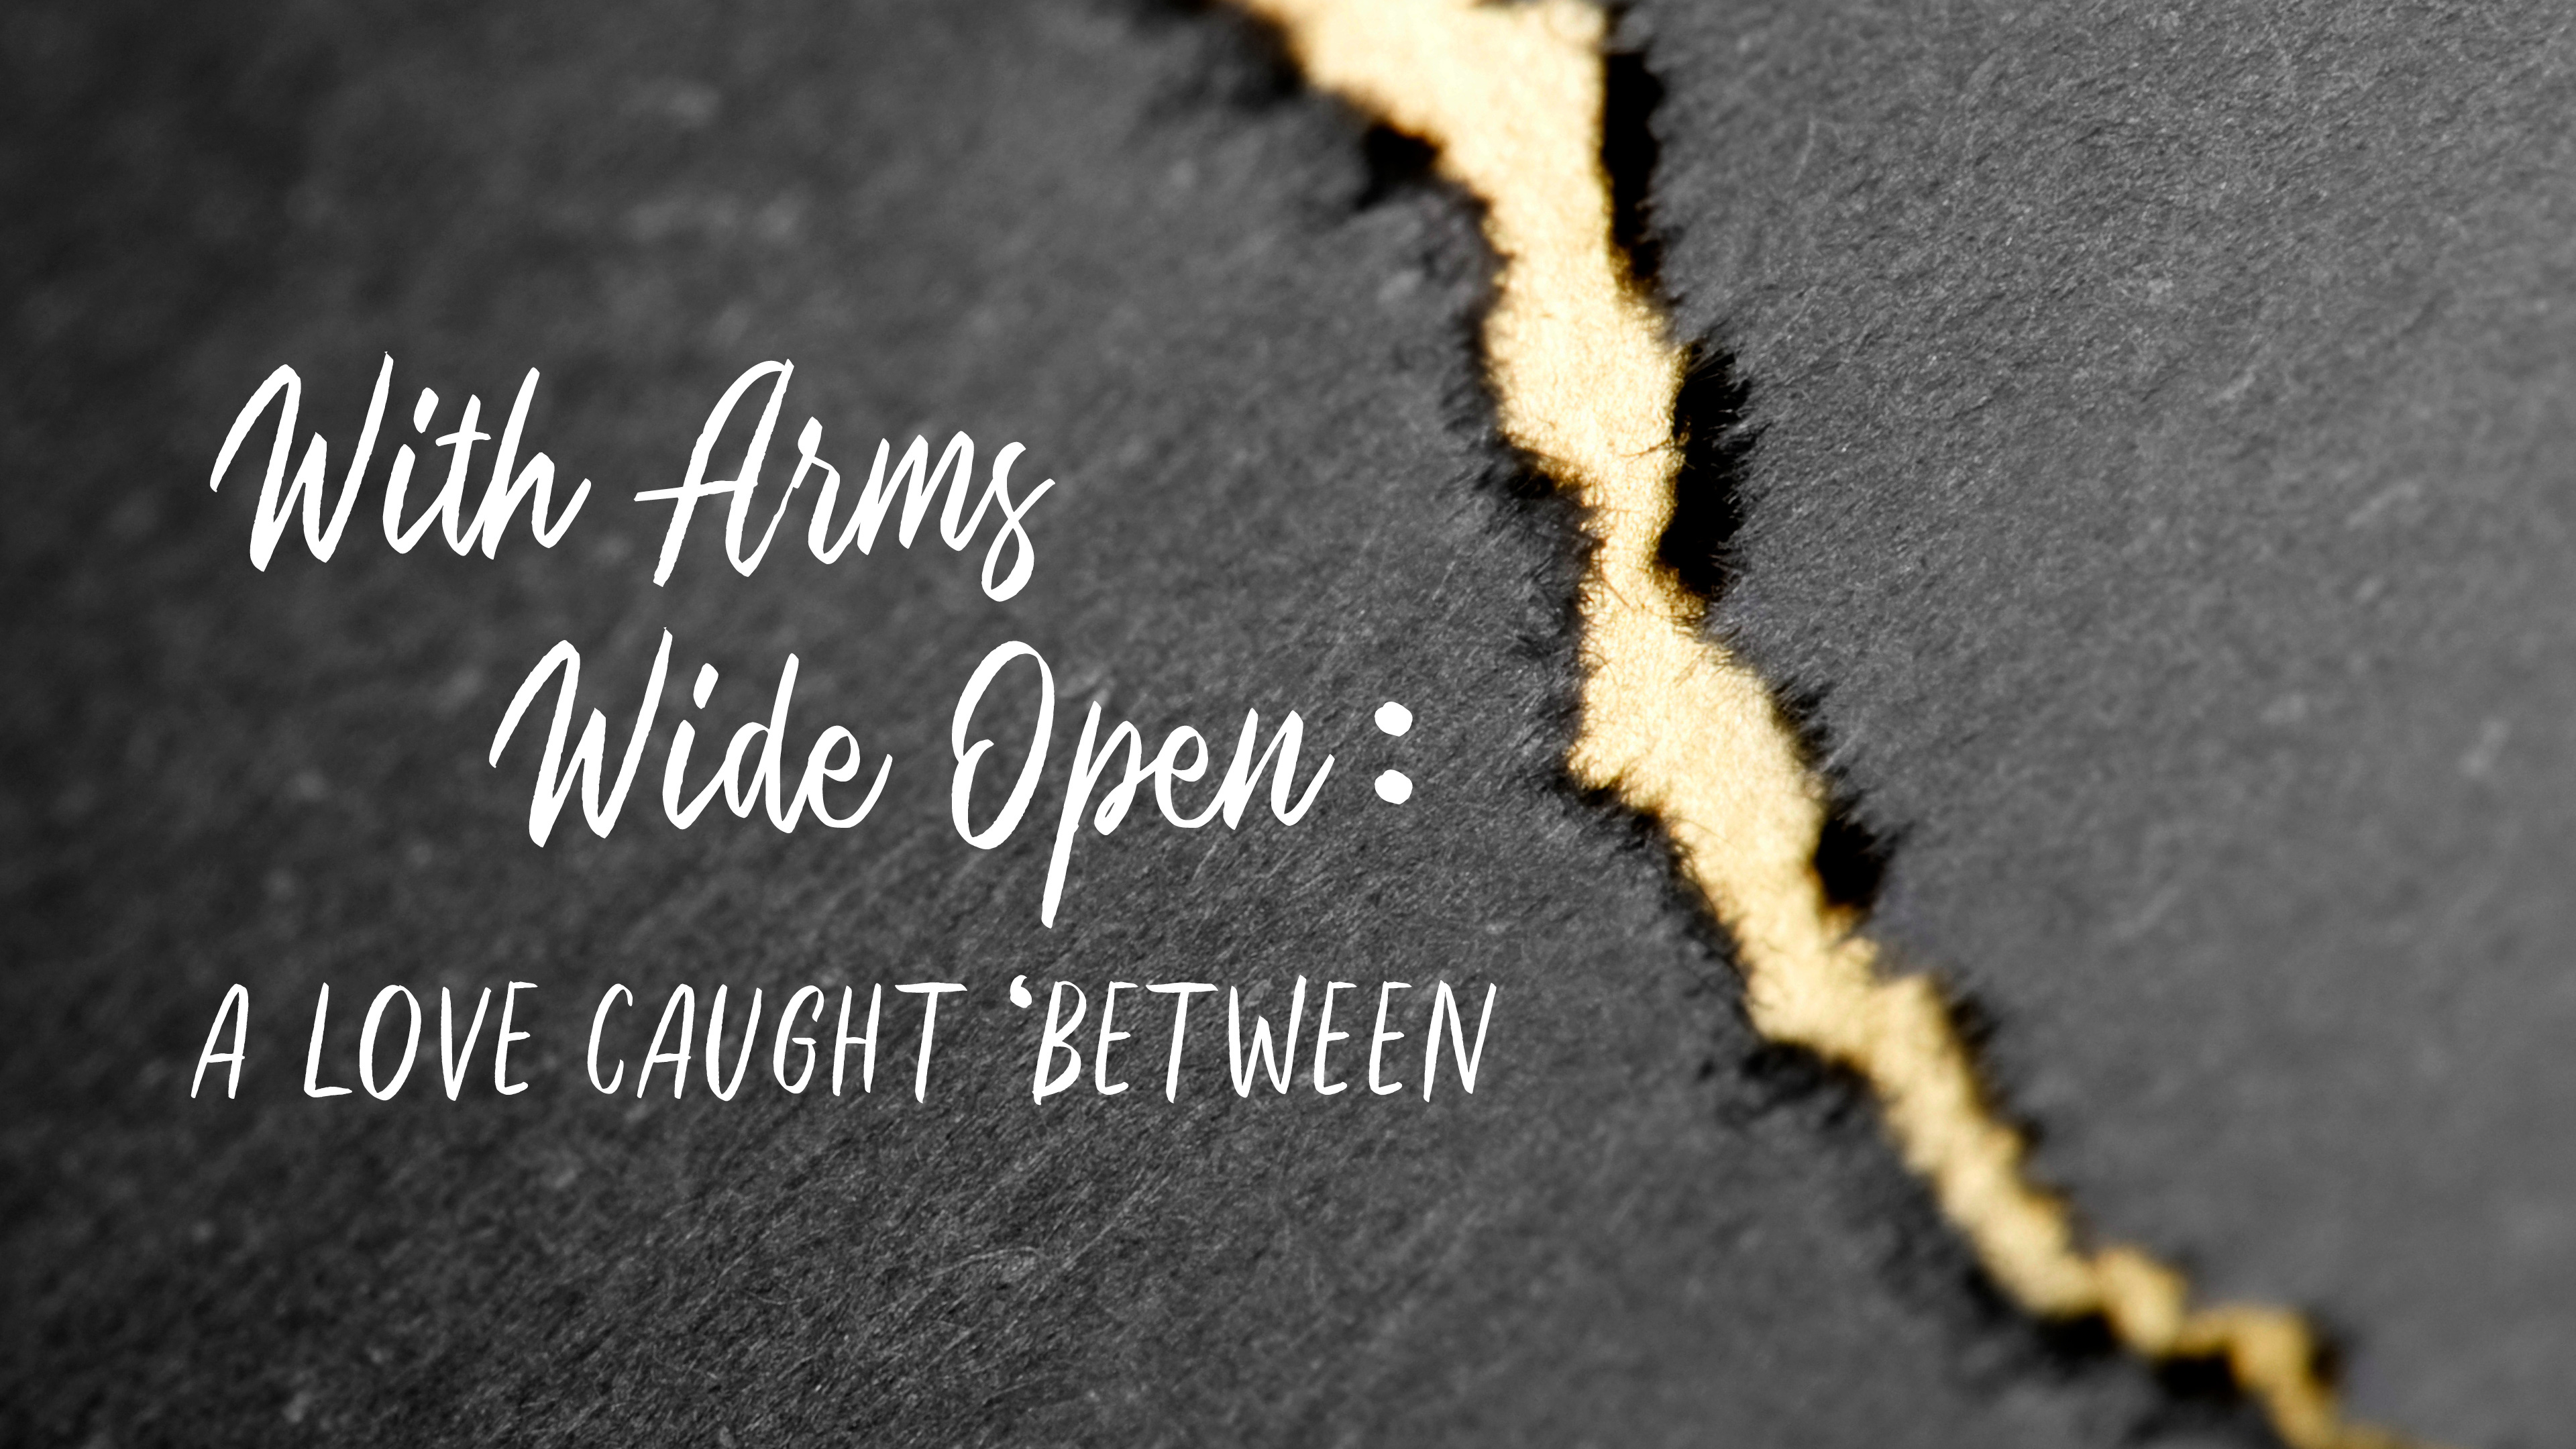 With Arms Wide Open: A Love Caught 'Between